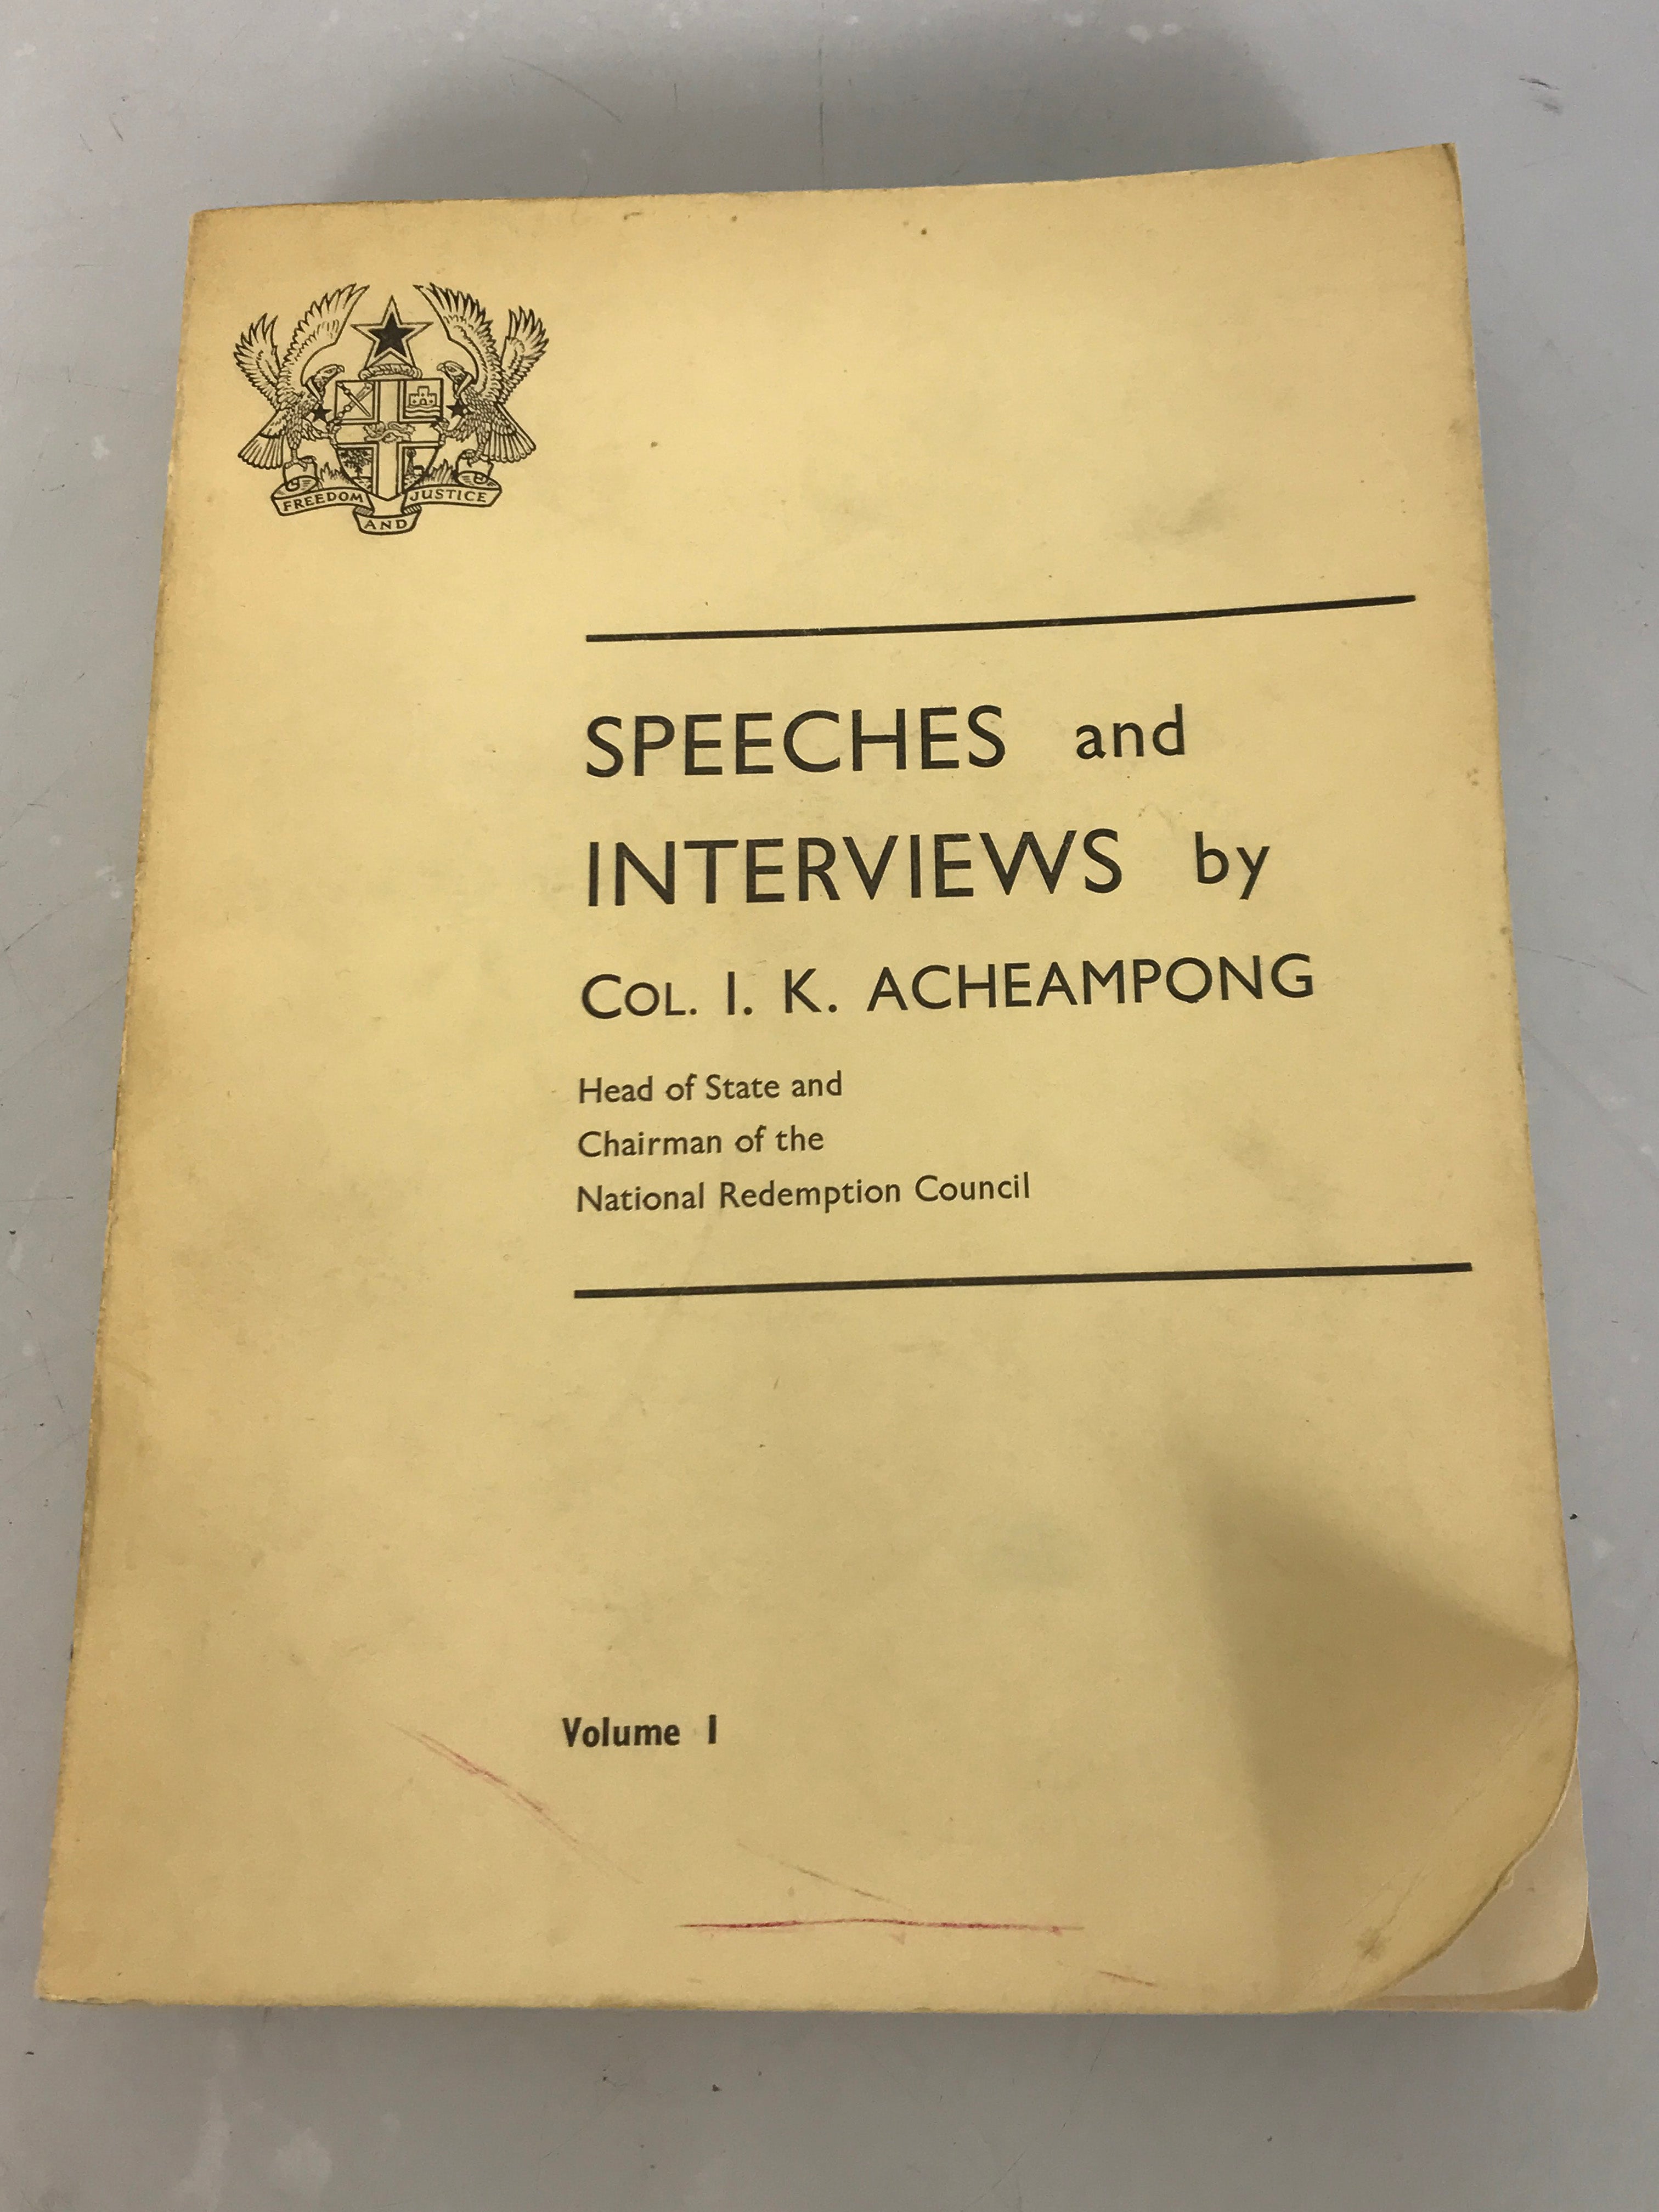 Rare Speeches and Interviews by Col. I.K. Acheampong (Ghana) Volume I c 1980s SC